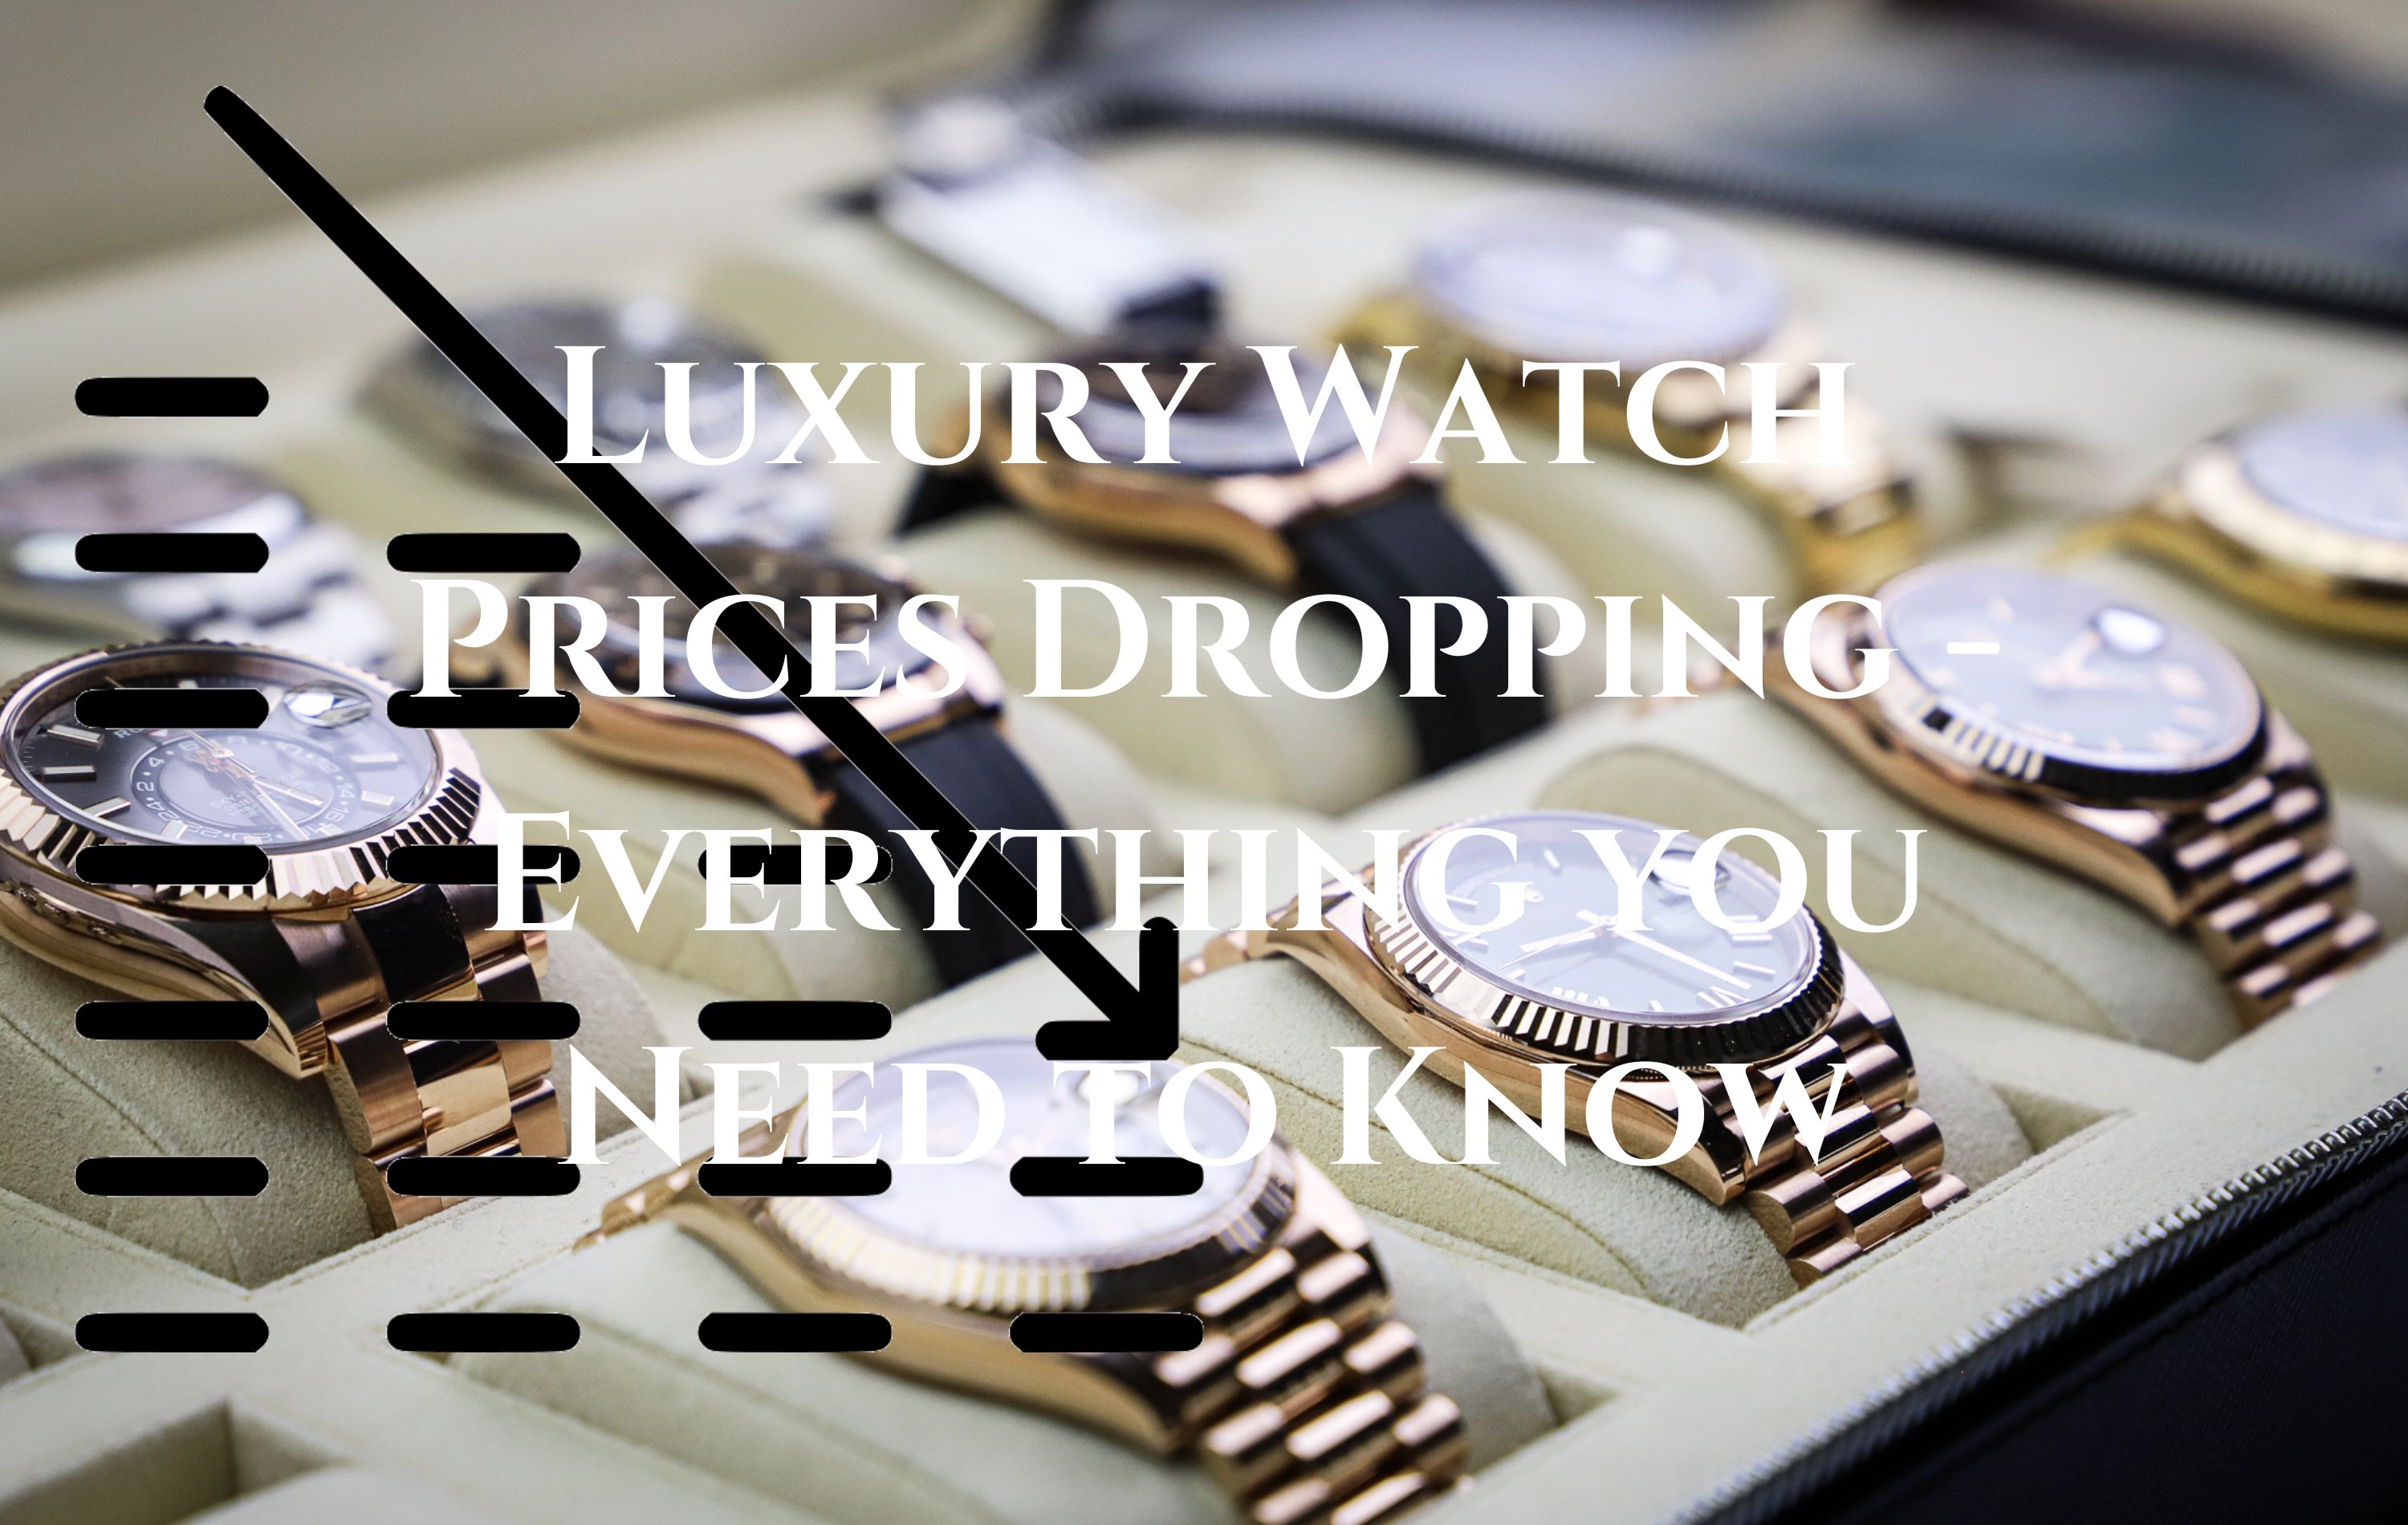 Luxury Watch Prices Dropping - Everything you Need to Know